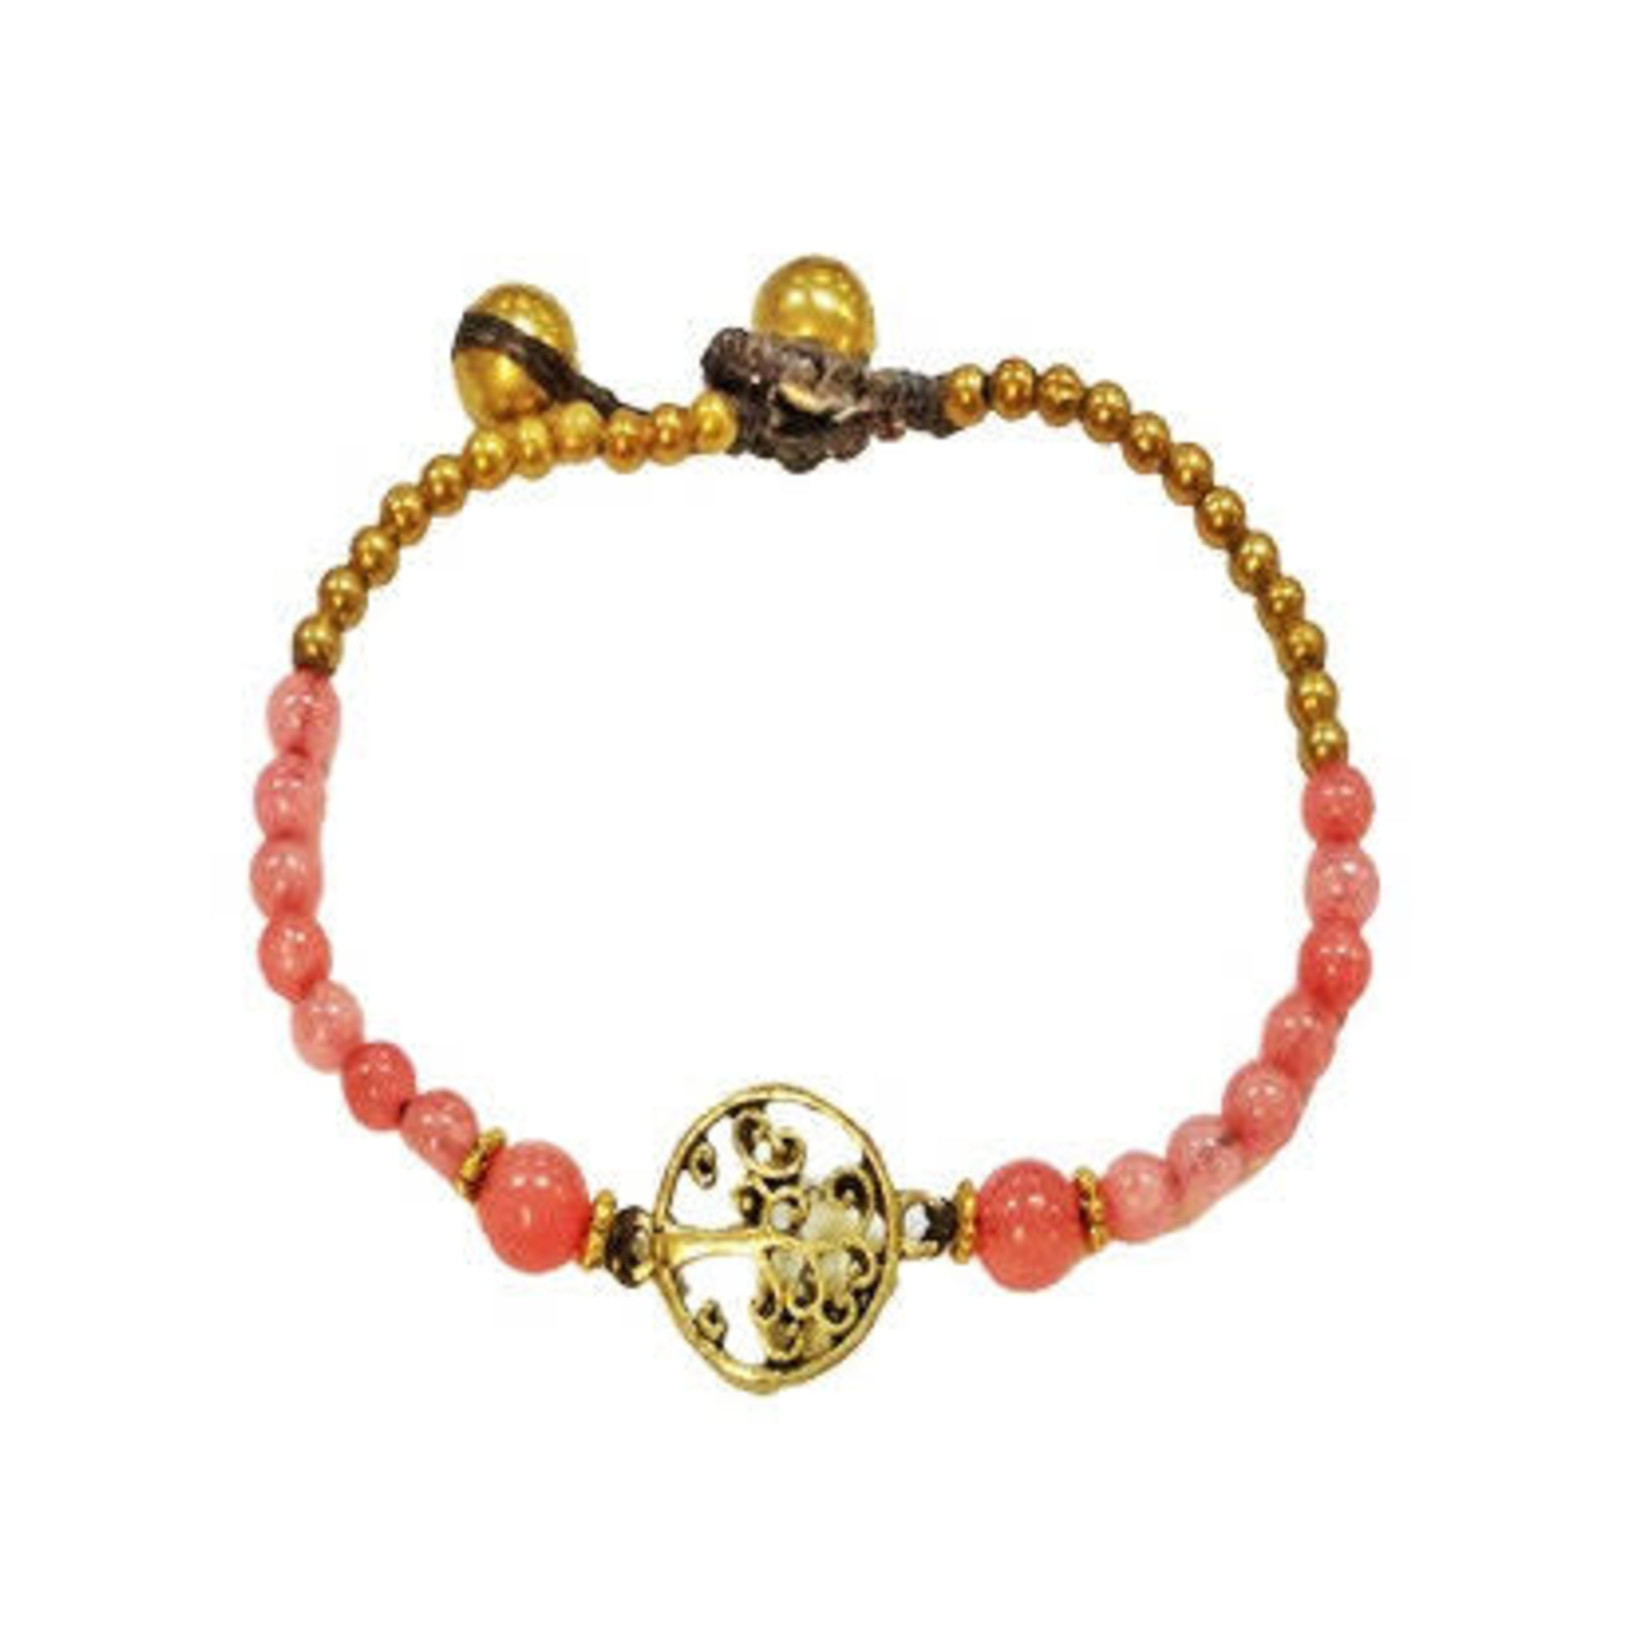 Tree of Life Brass and Glass Bead Bracelet TOL7 Pink